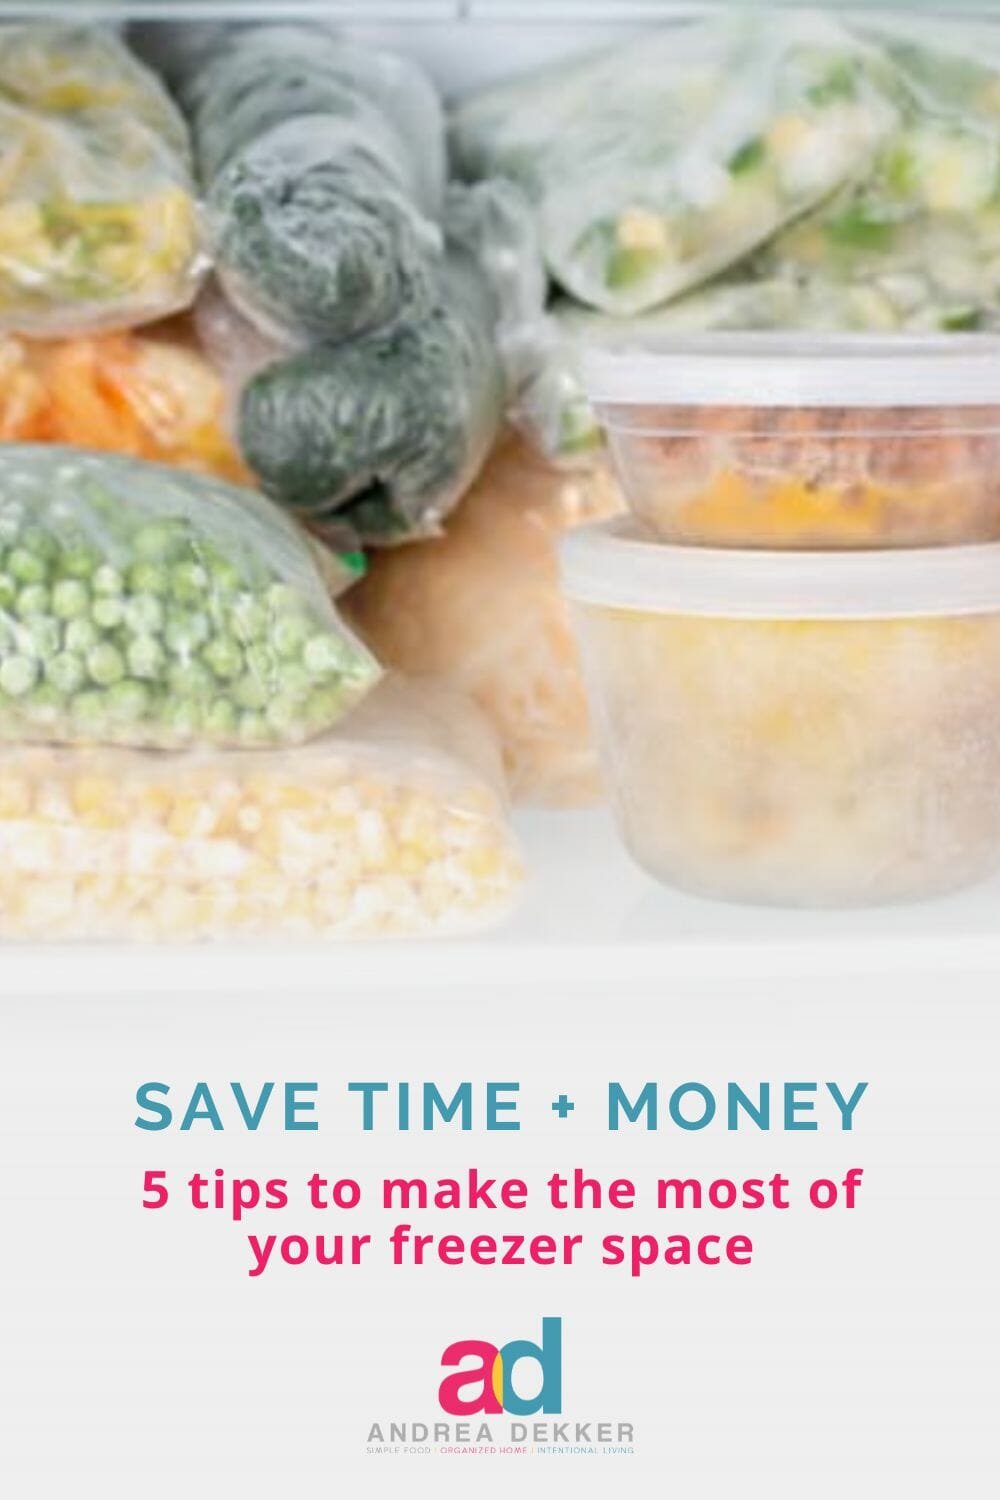 Maximize your freezer space and save time, energy, and money. Who knows... your freezer might just become your favorite appliance! via @andreadekker